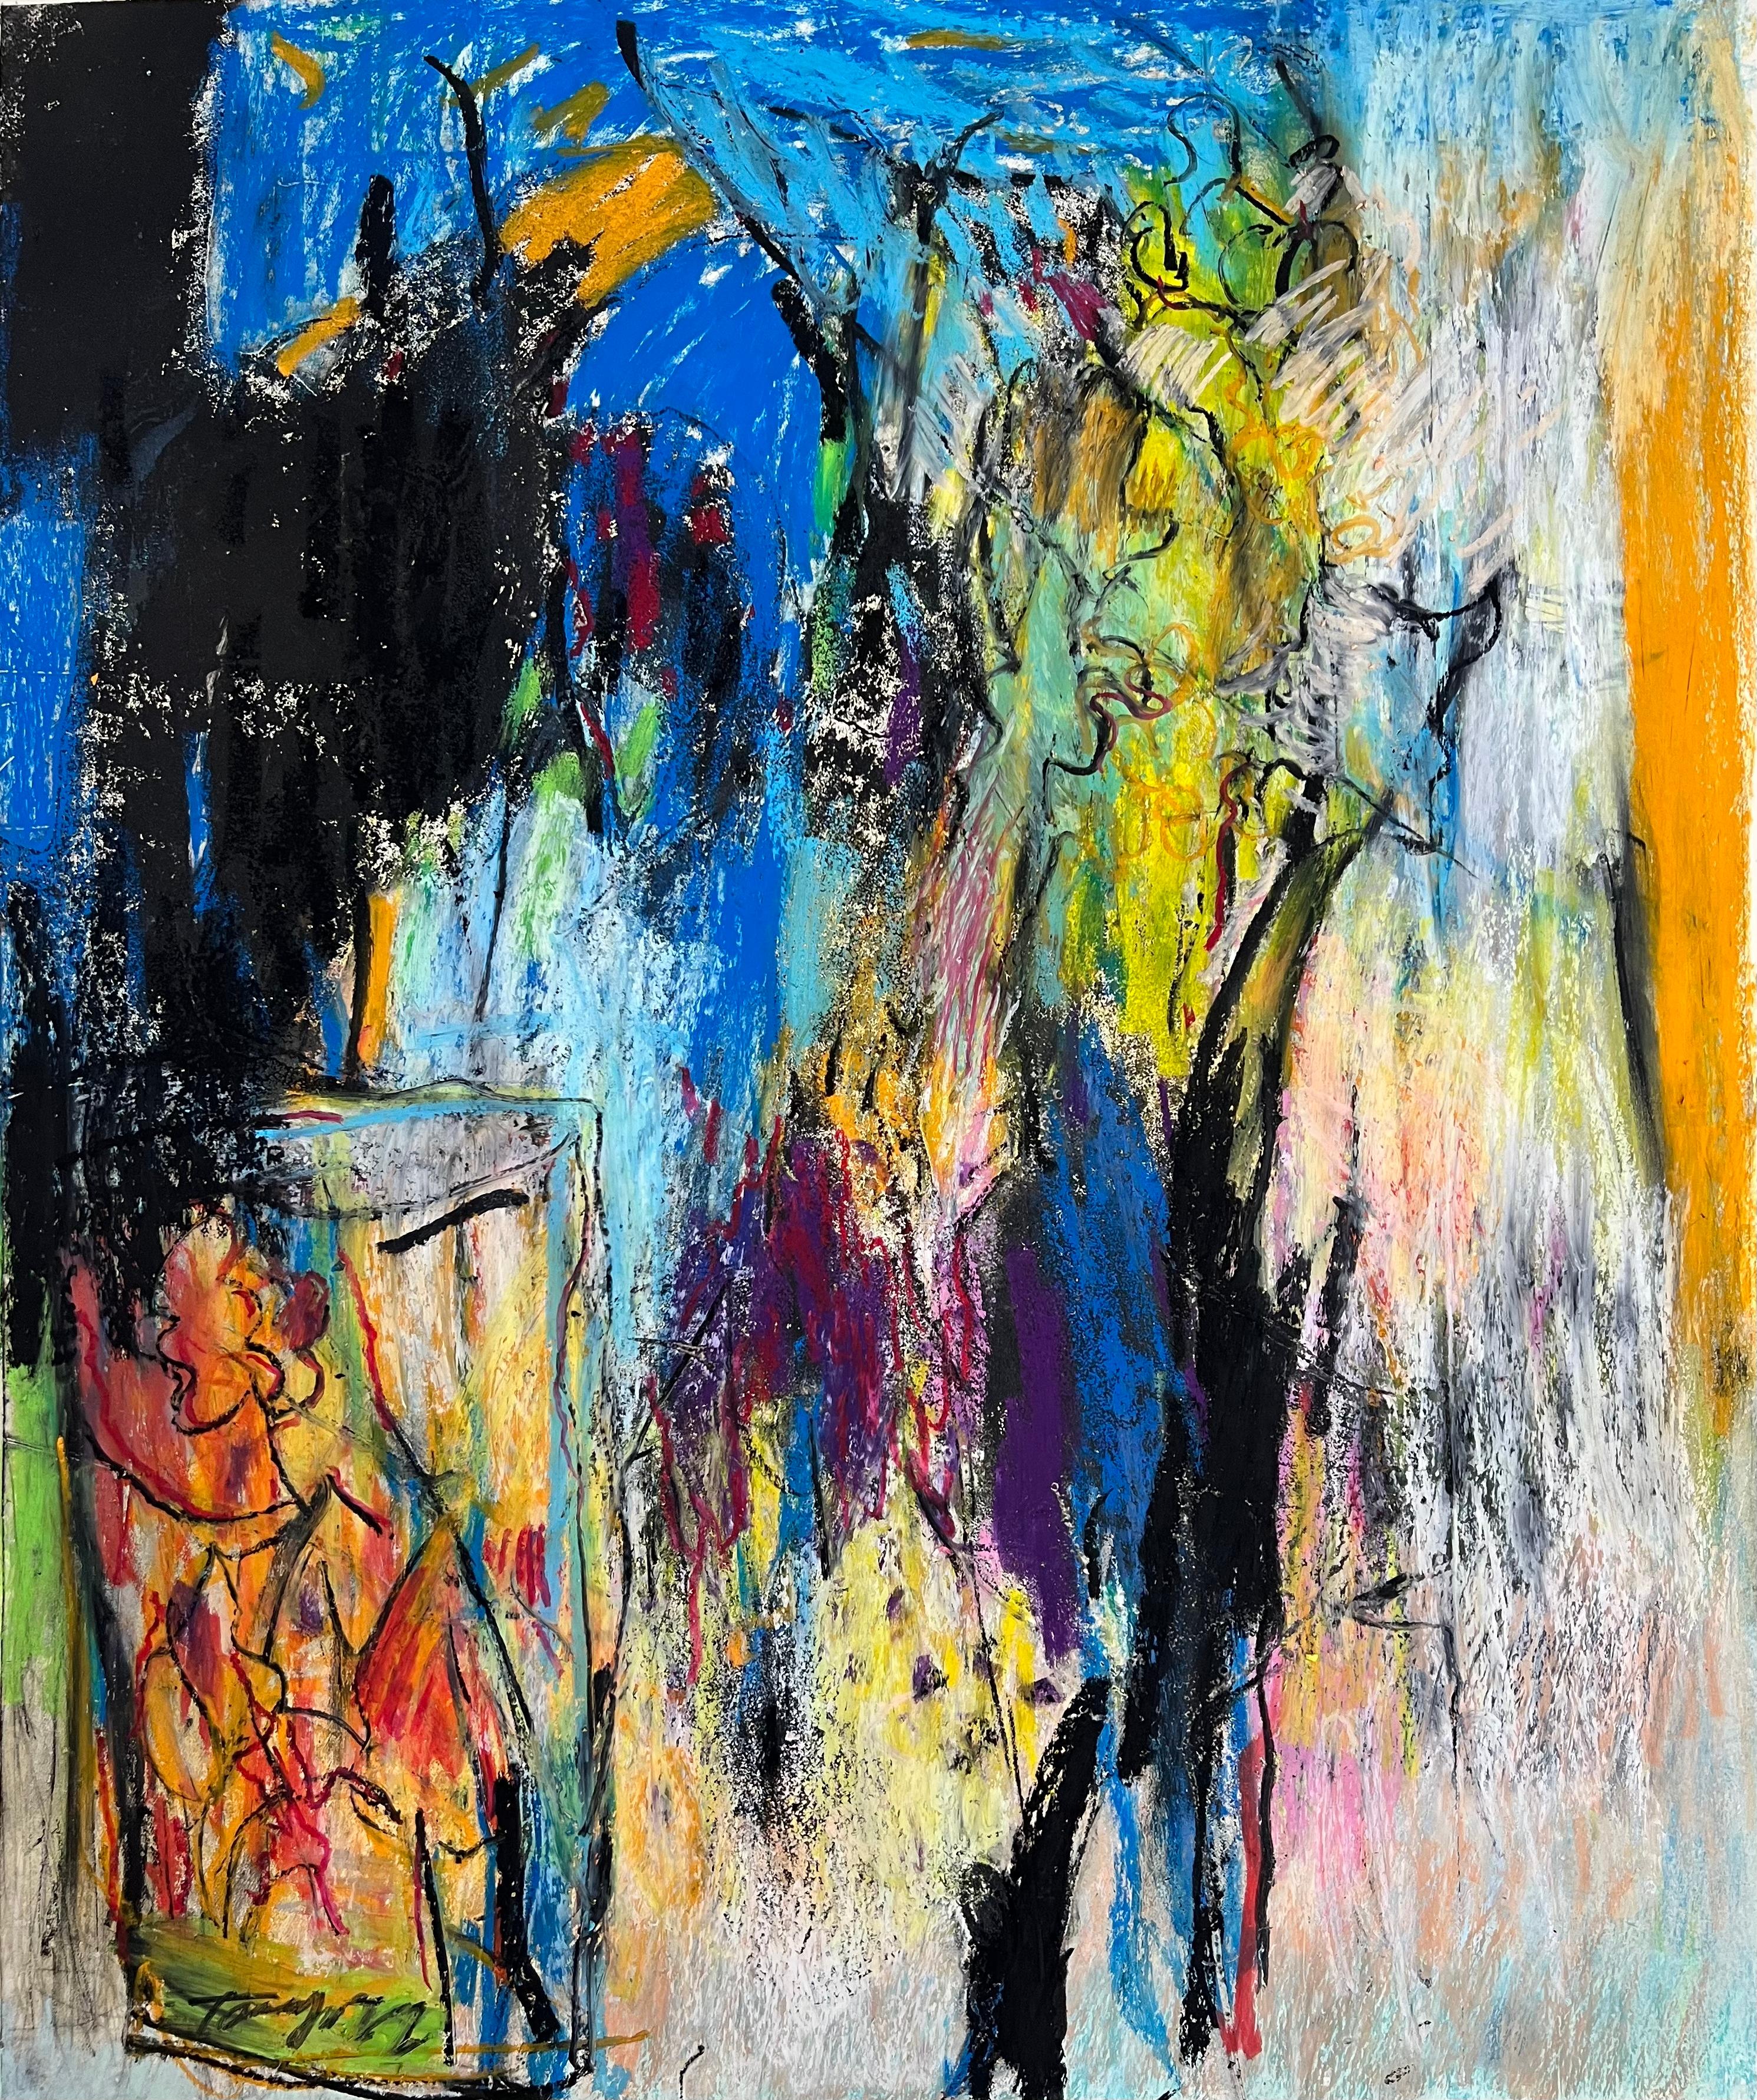 Abstract Expressionist oil painting  - Series The Exotic Landscape No.22-7 - Mixed Media Art by Tang Chenghua